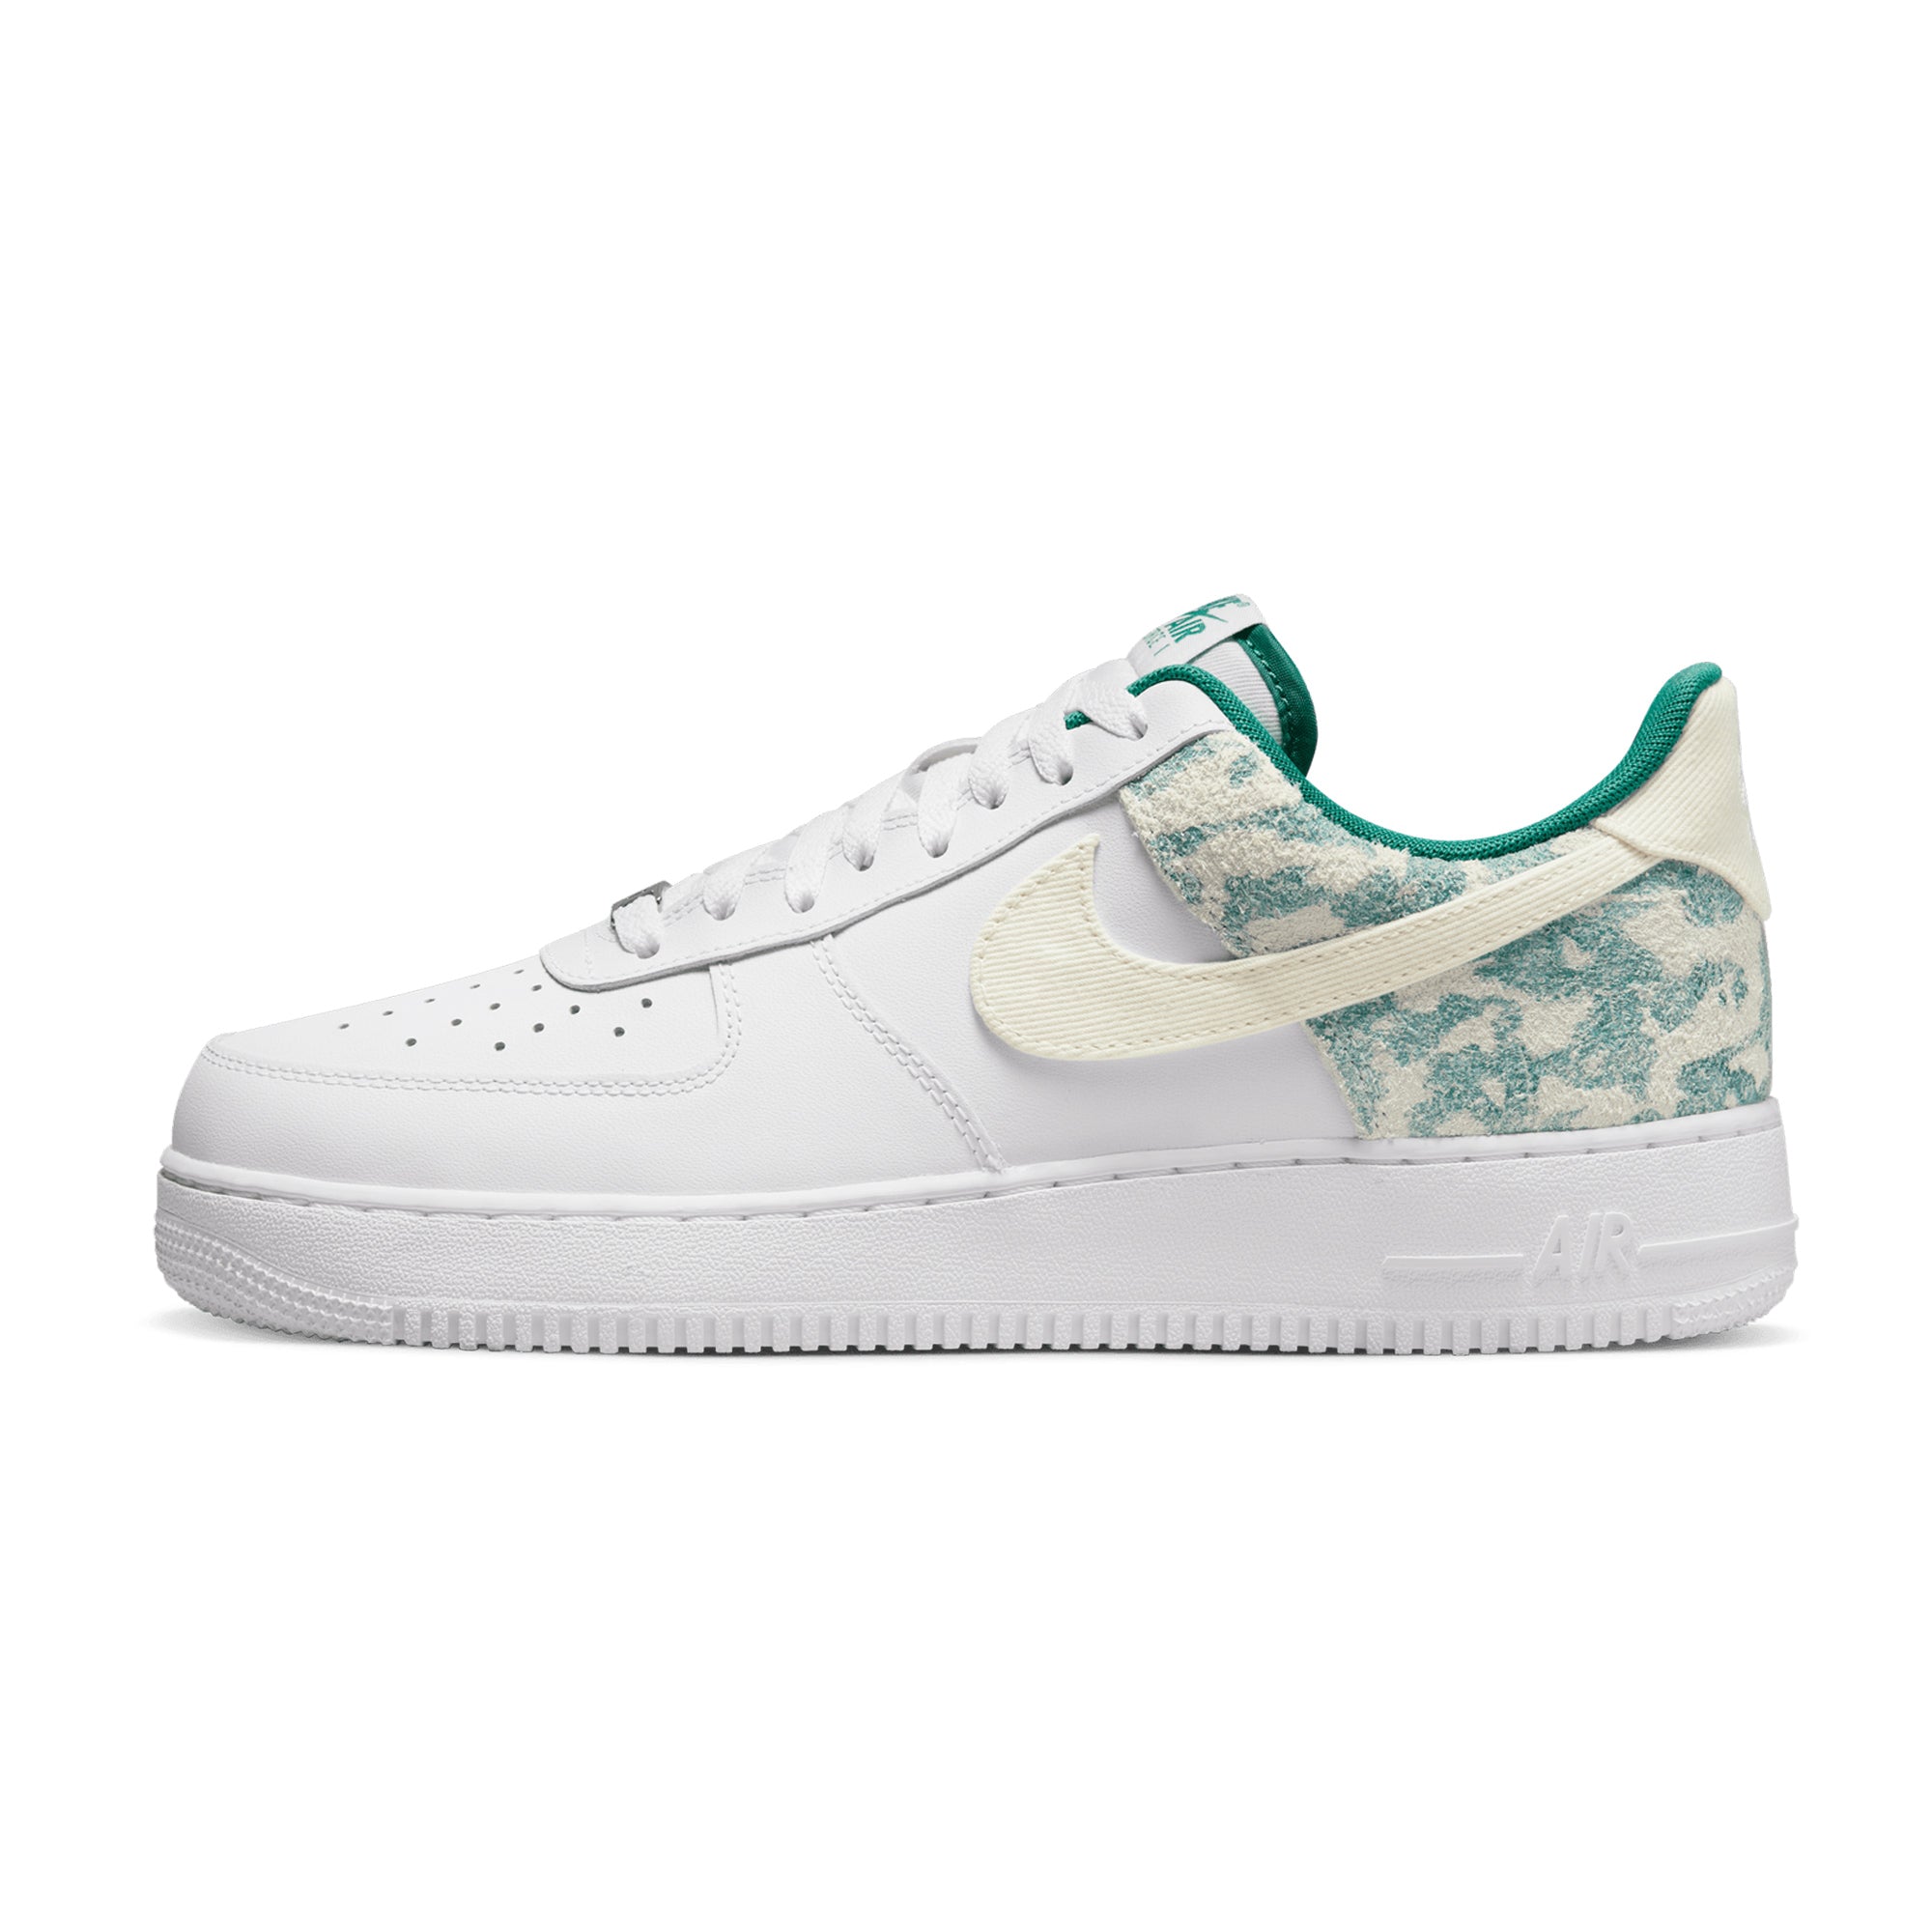 Size 10 Nike Air Force 1 High '07 LV8 White Multi All Low Iridescent